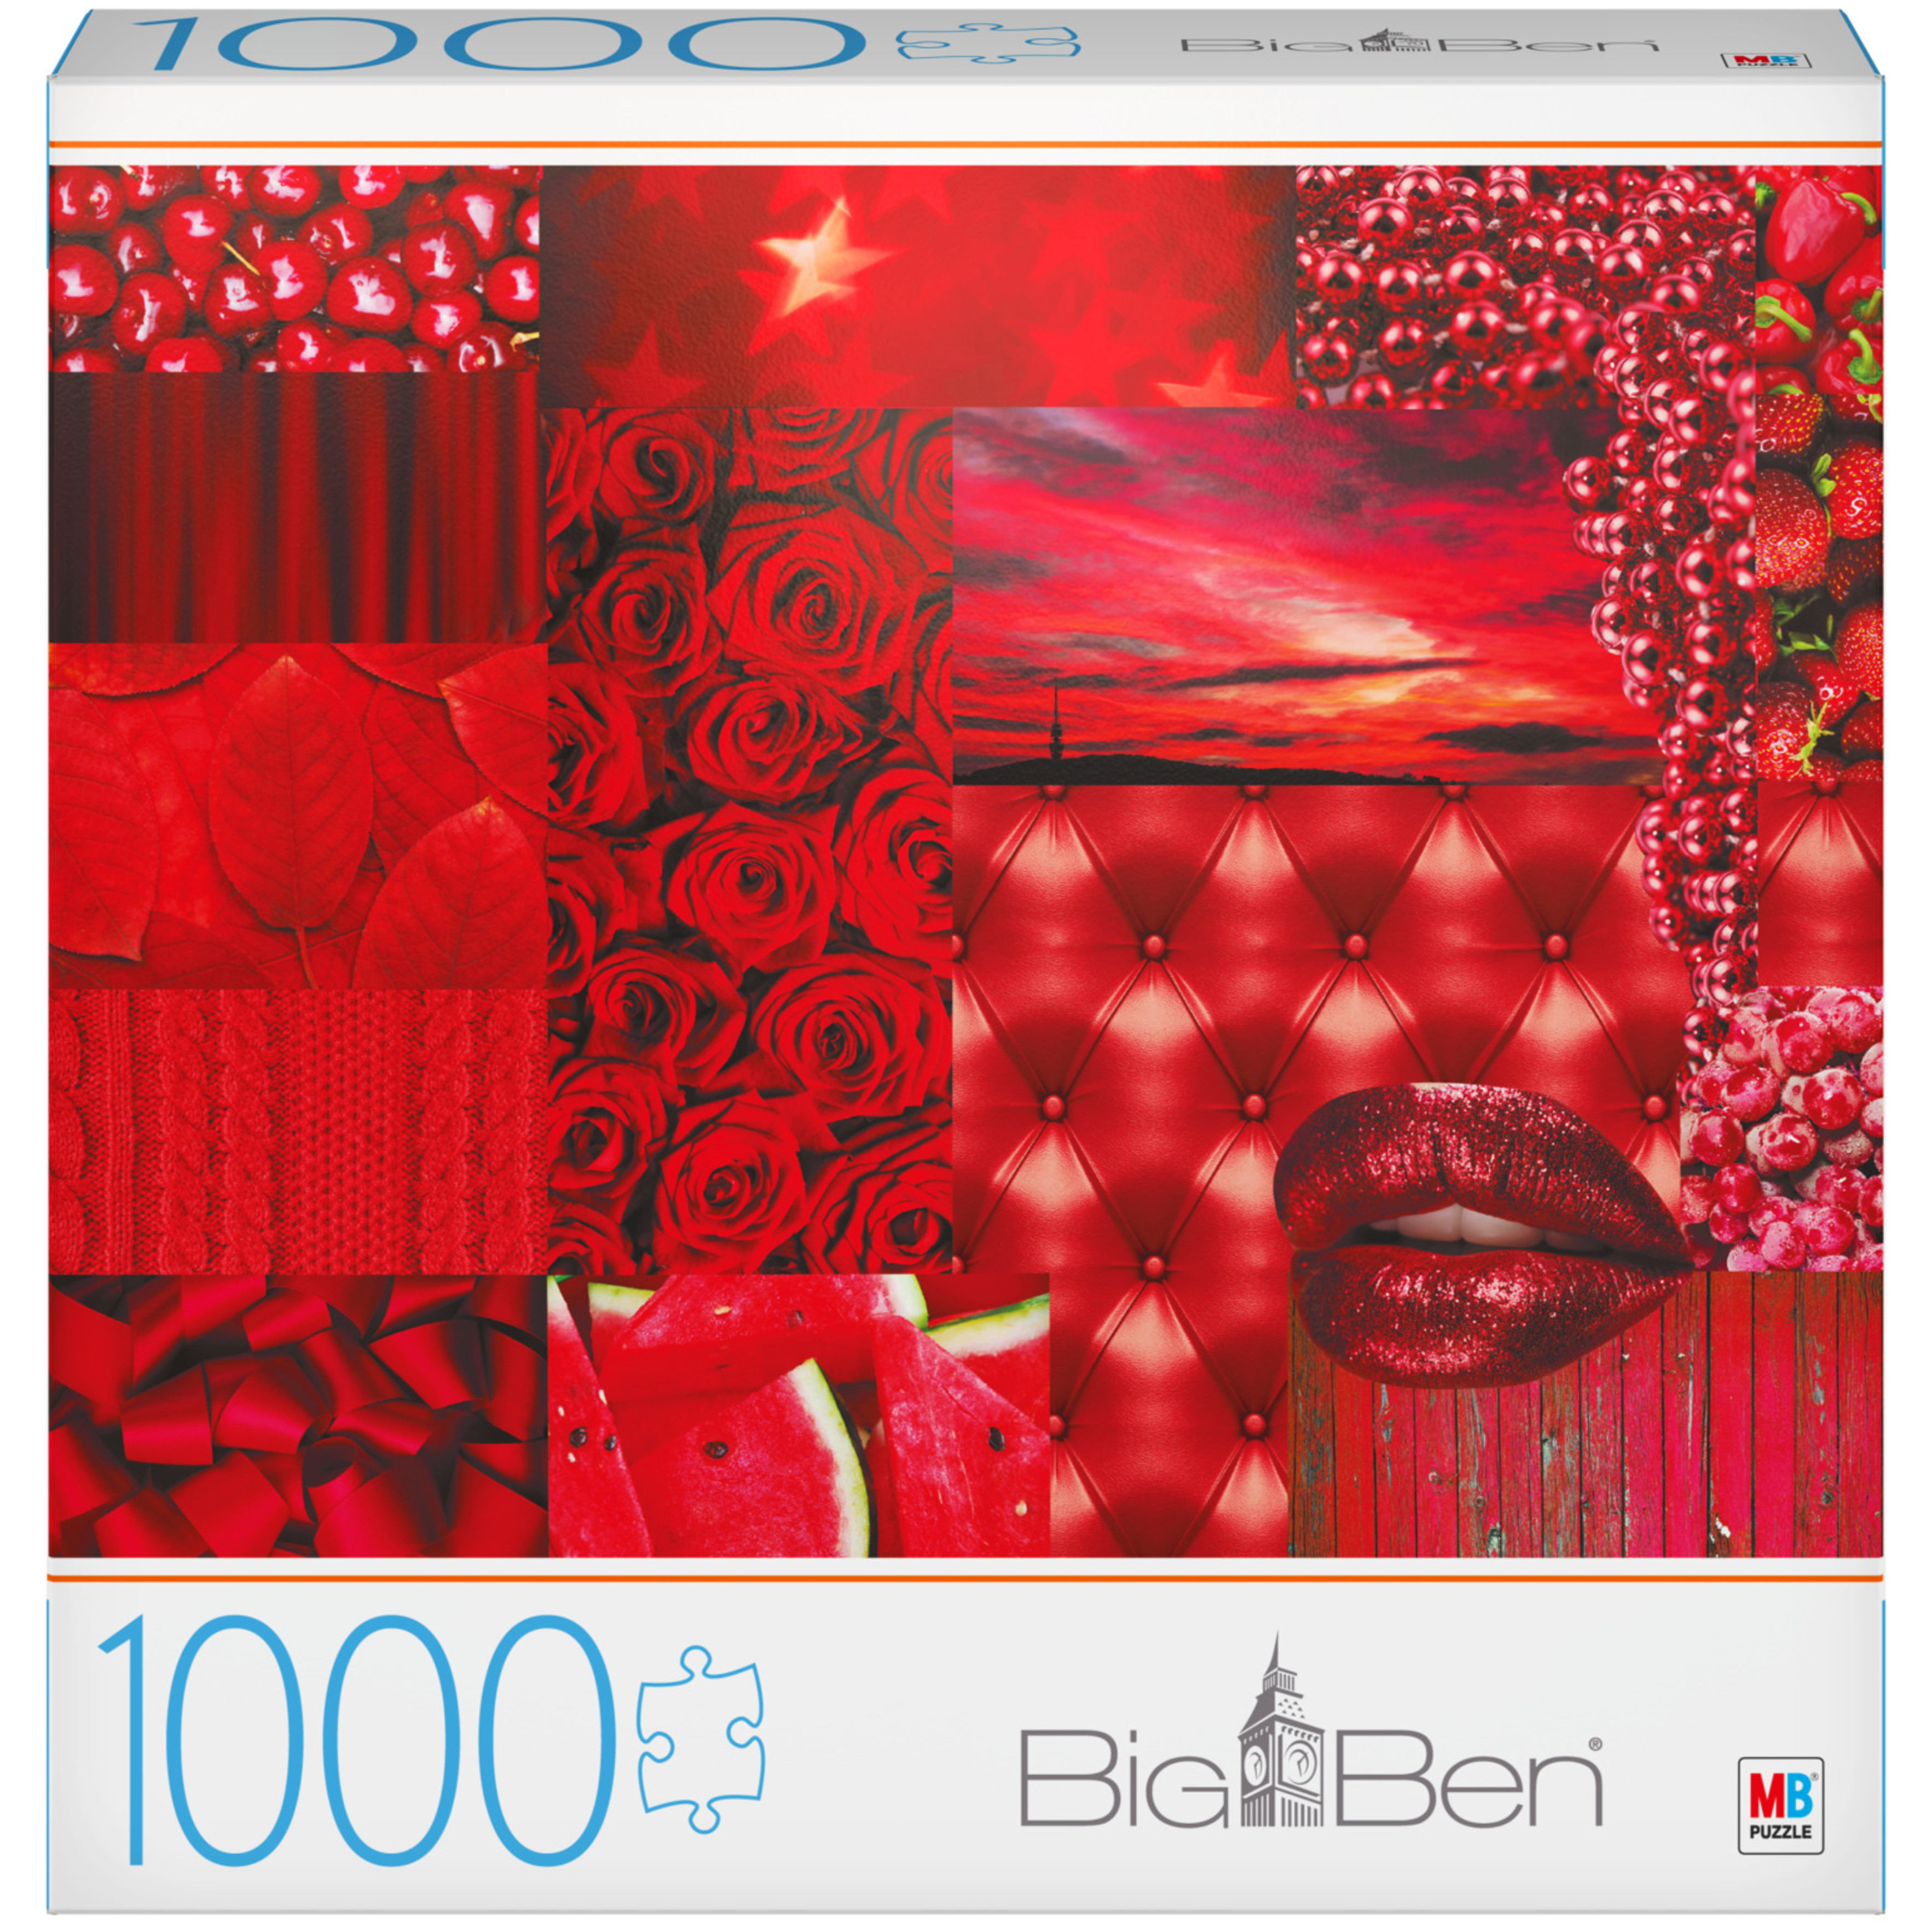 Big Ben Milton Bradley 1000-Piece Jigsaw Puzzle, for Adults and Kids Ages 8 and up (Styles Will Vary) - image 4 of 8